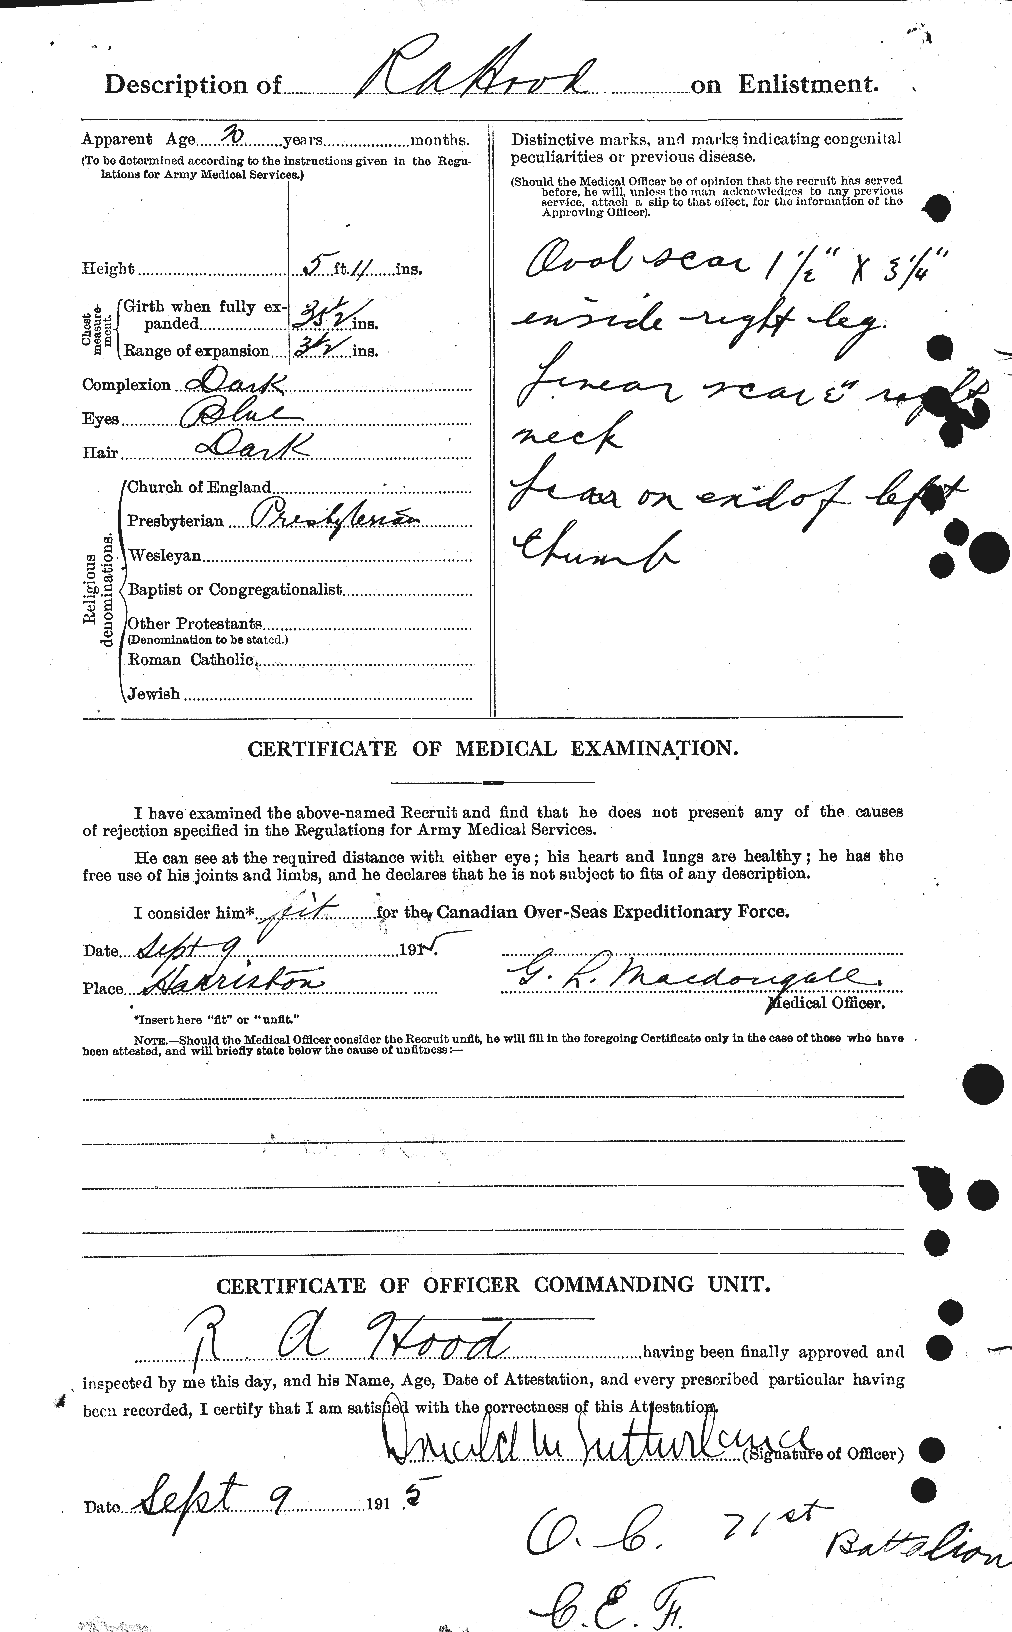 Personnel Records of the First World War - CEF 409372b